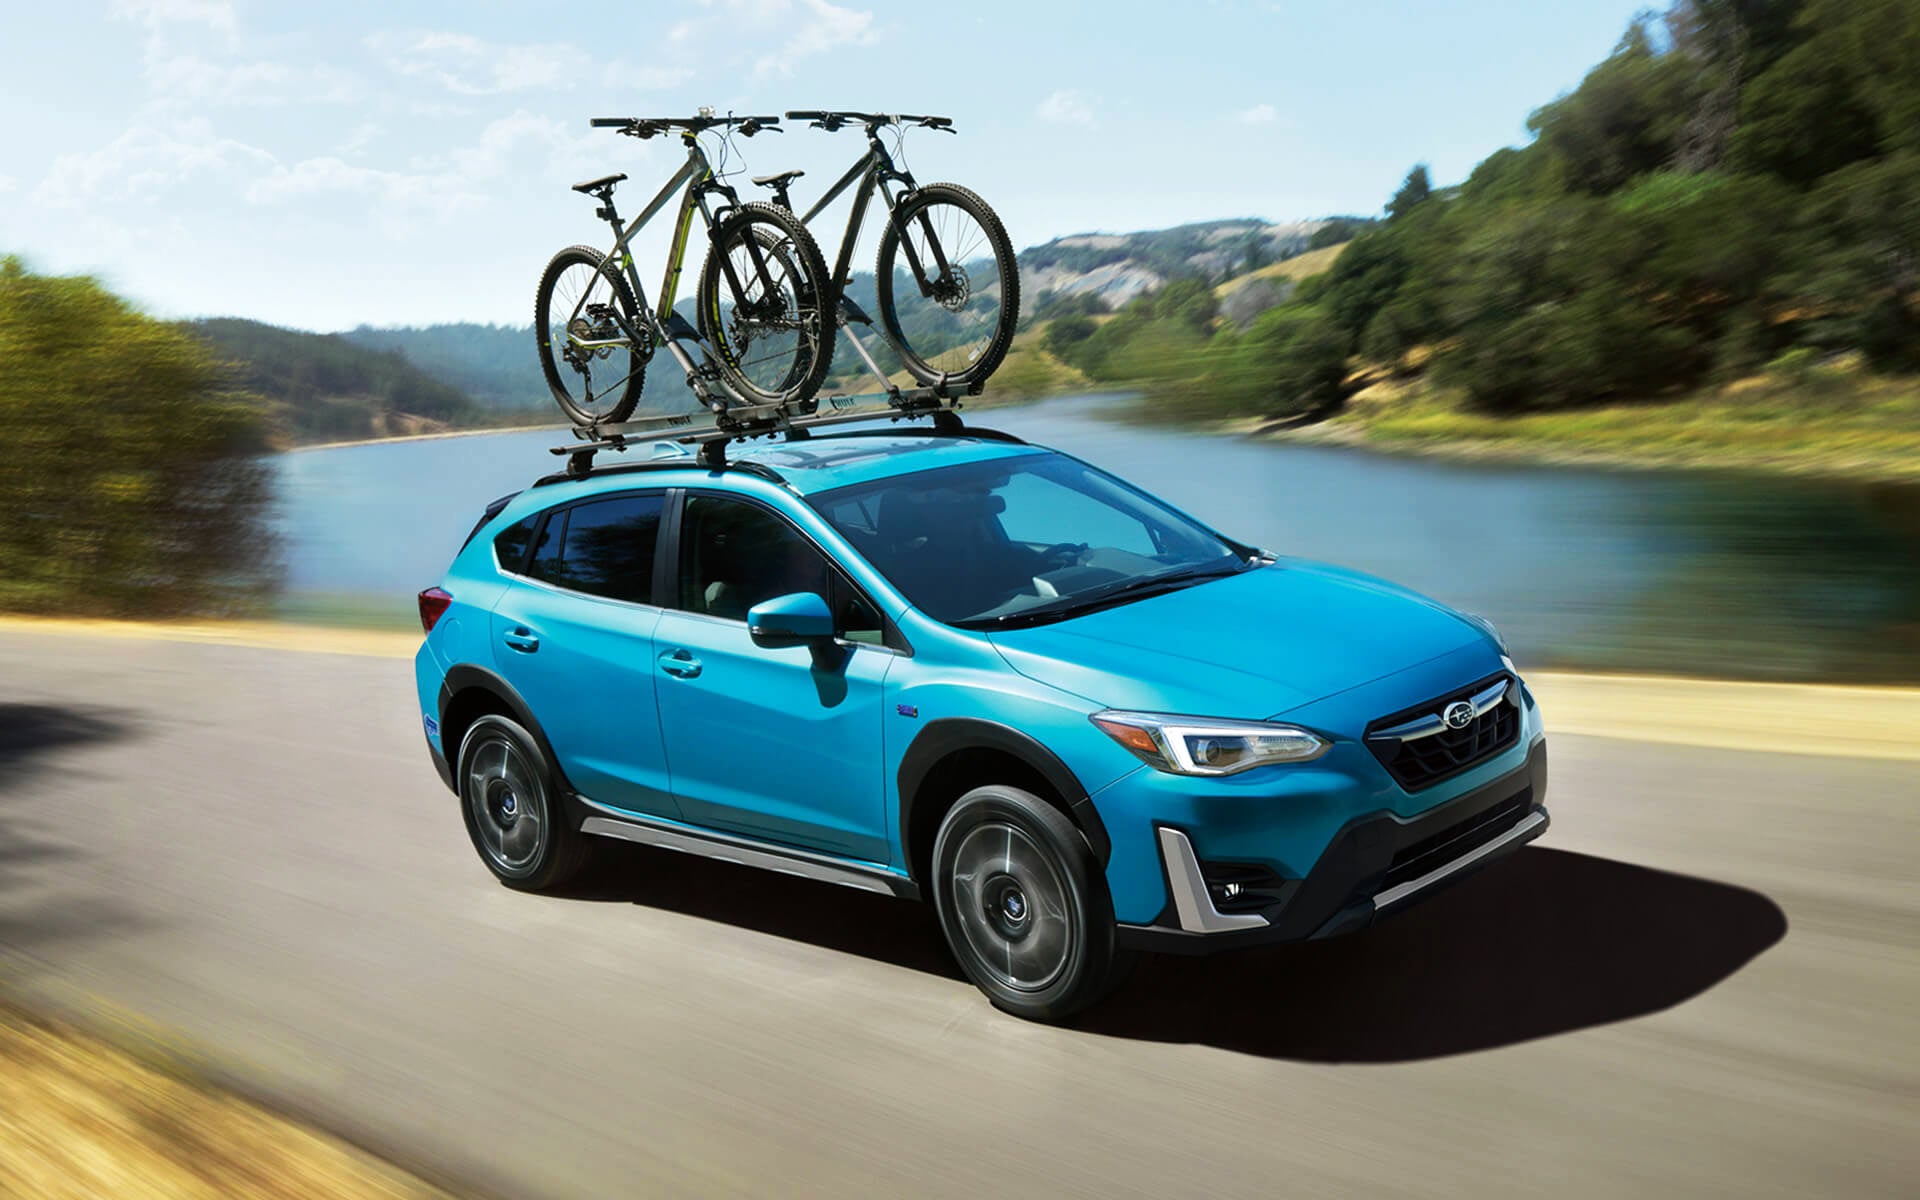 A blue Crosstrek Hybrid with two bicycles on its roof rack driving beside a river | Romano Subaru in Syracuse NY